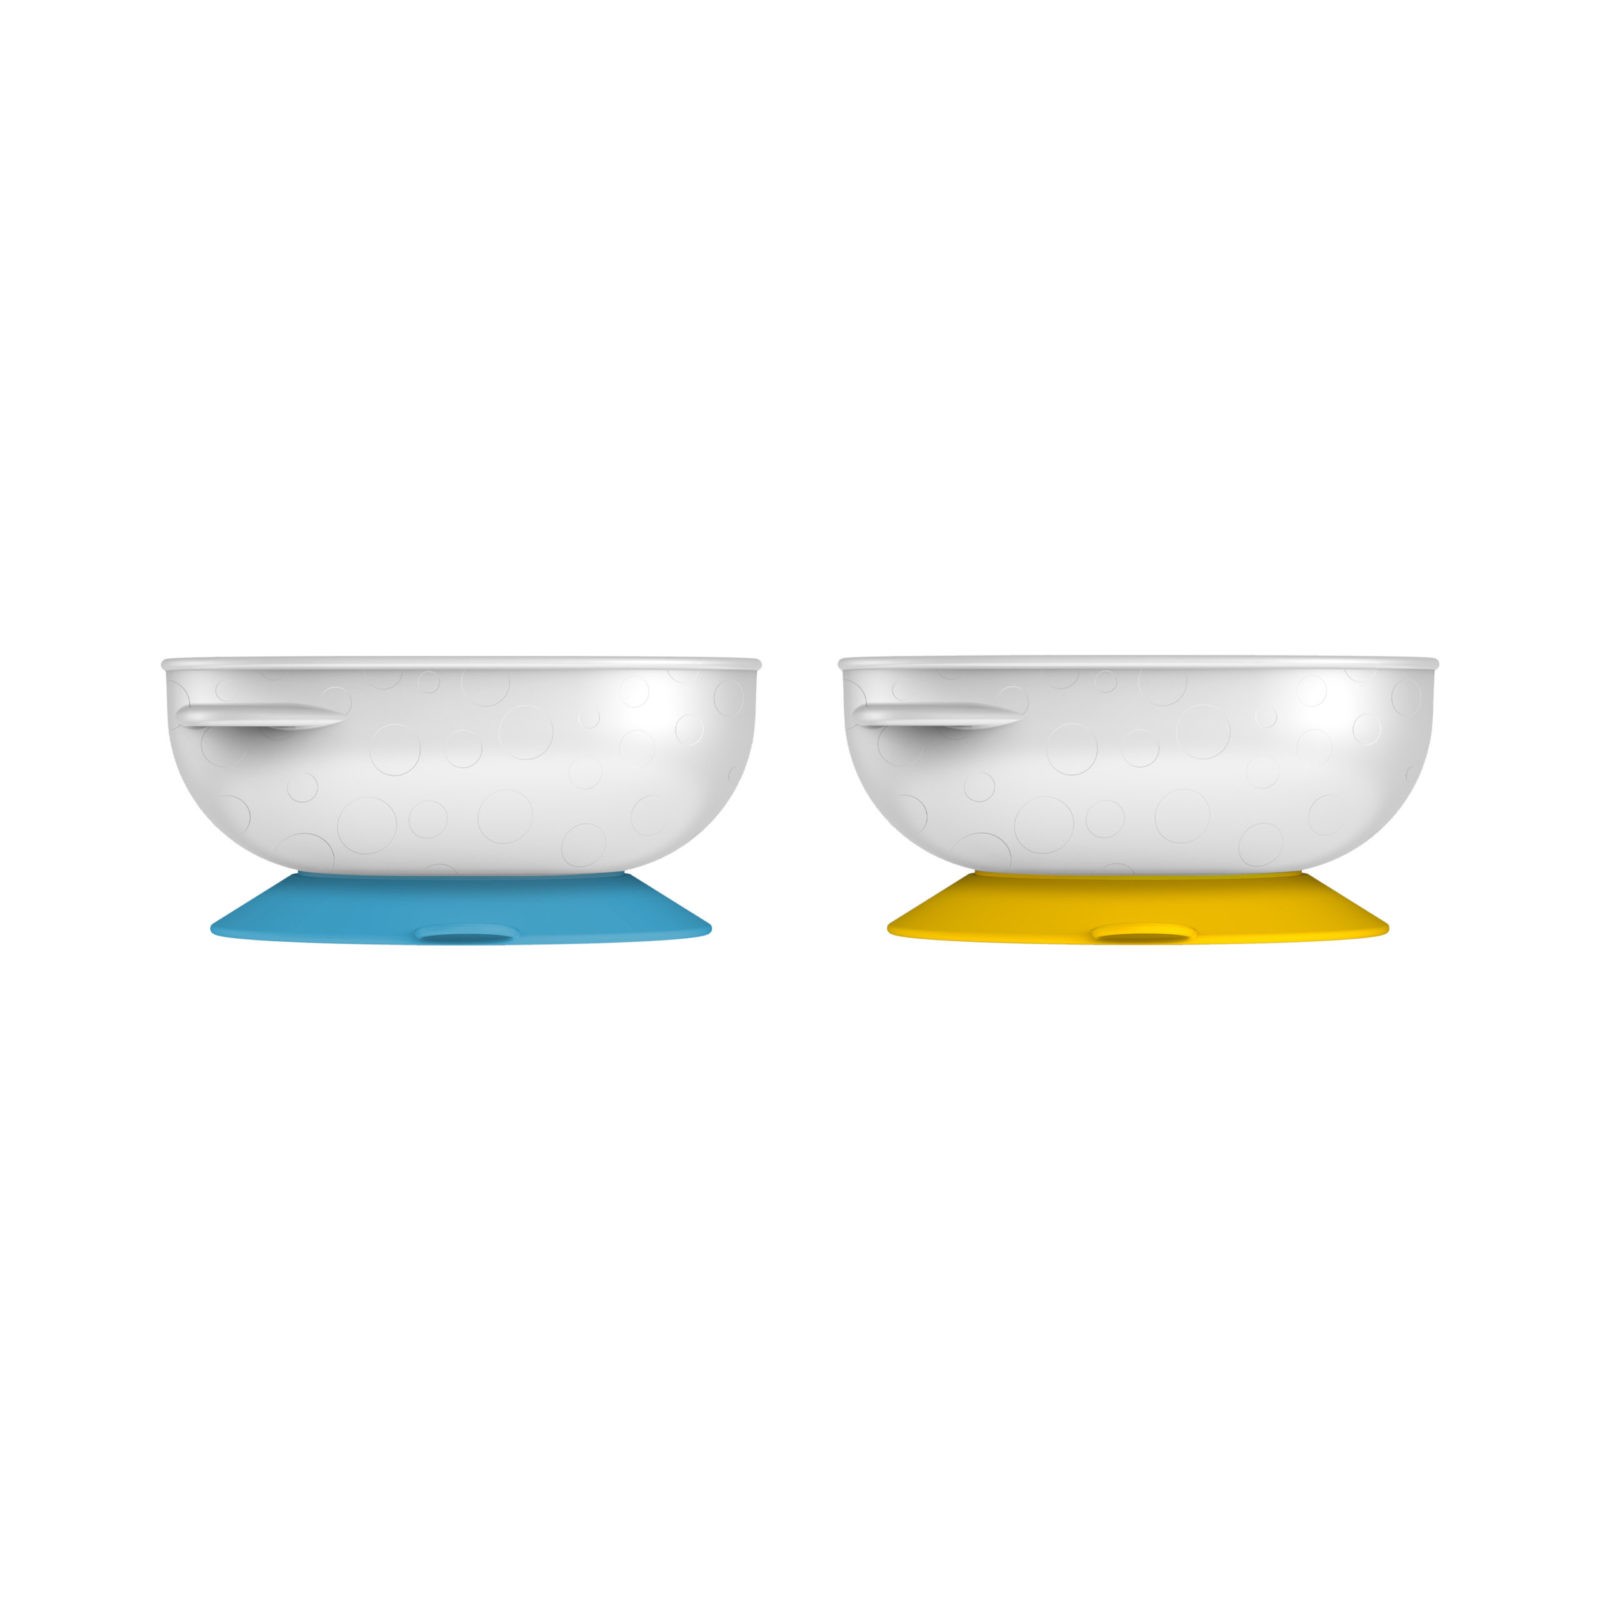 https://www.drbrownsbaby.com/wp-content/uploads/2020/08/Suction_Cup_Bowl_With_Pattern_Yellow_and_Blue-scaled.jpg